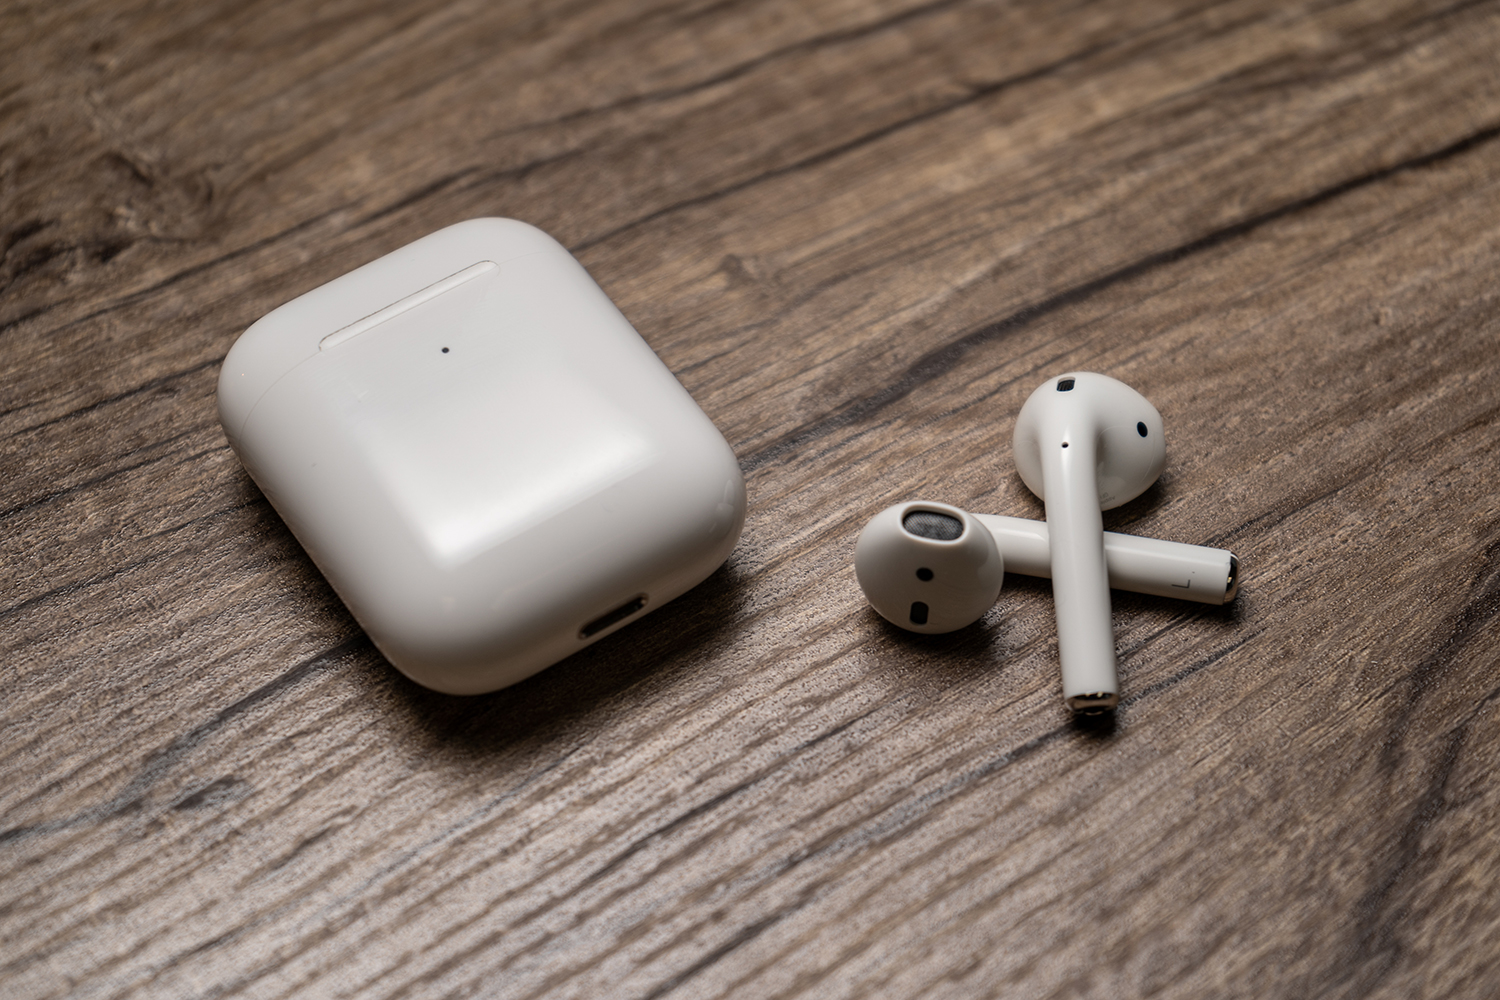 The second-generation Apple AirPods beside their charging case.